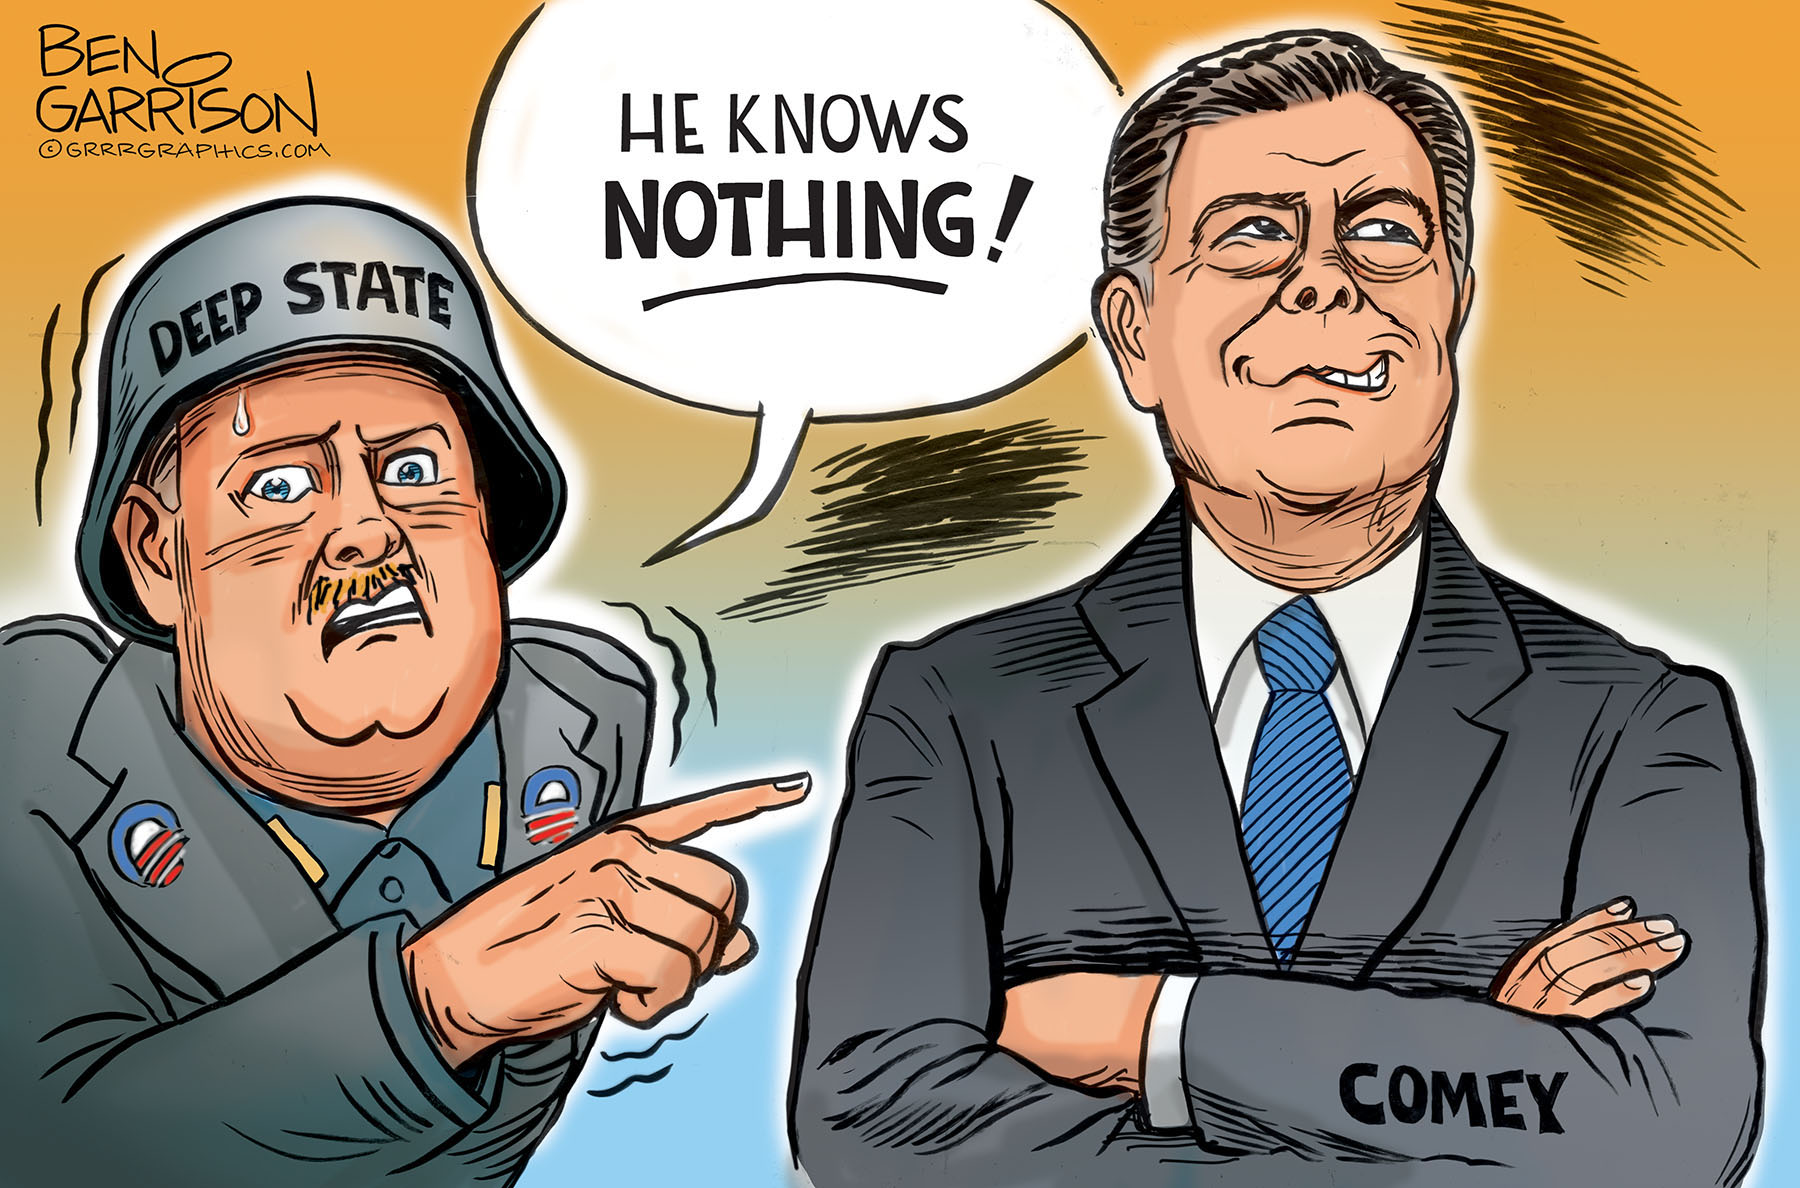 https://grrrgraphics.com/wp-content/uploads/2020/10/comey_knows_nothing-2.jpg